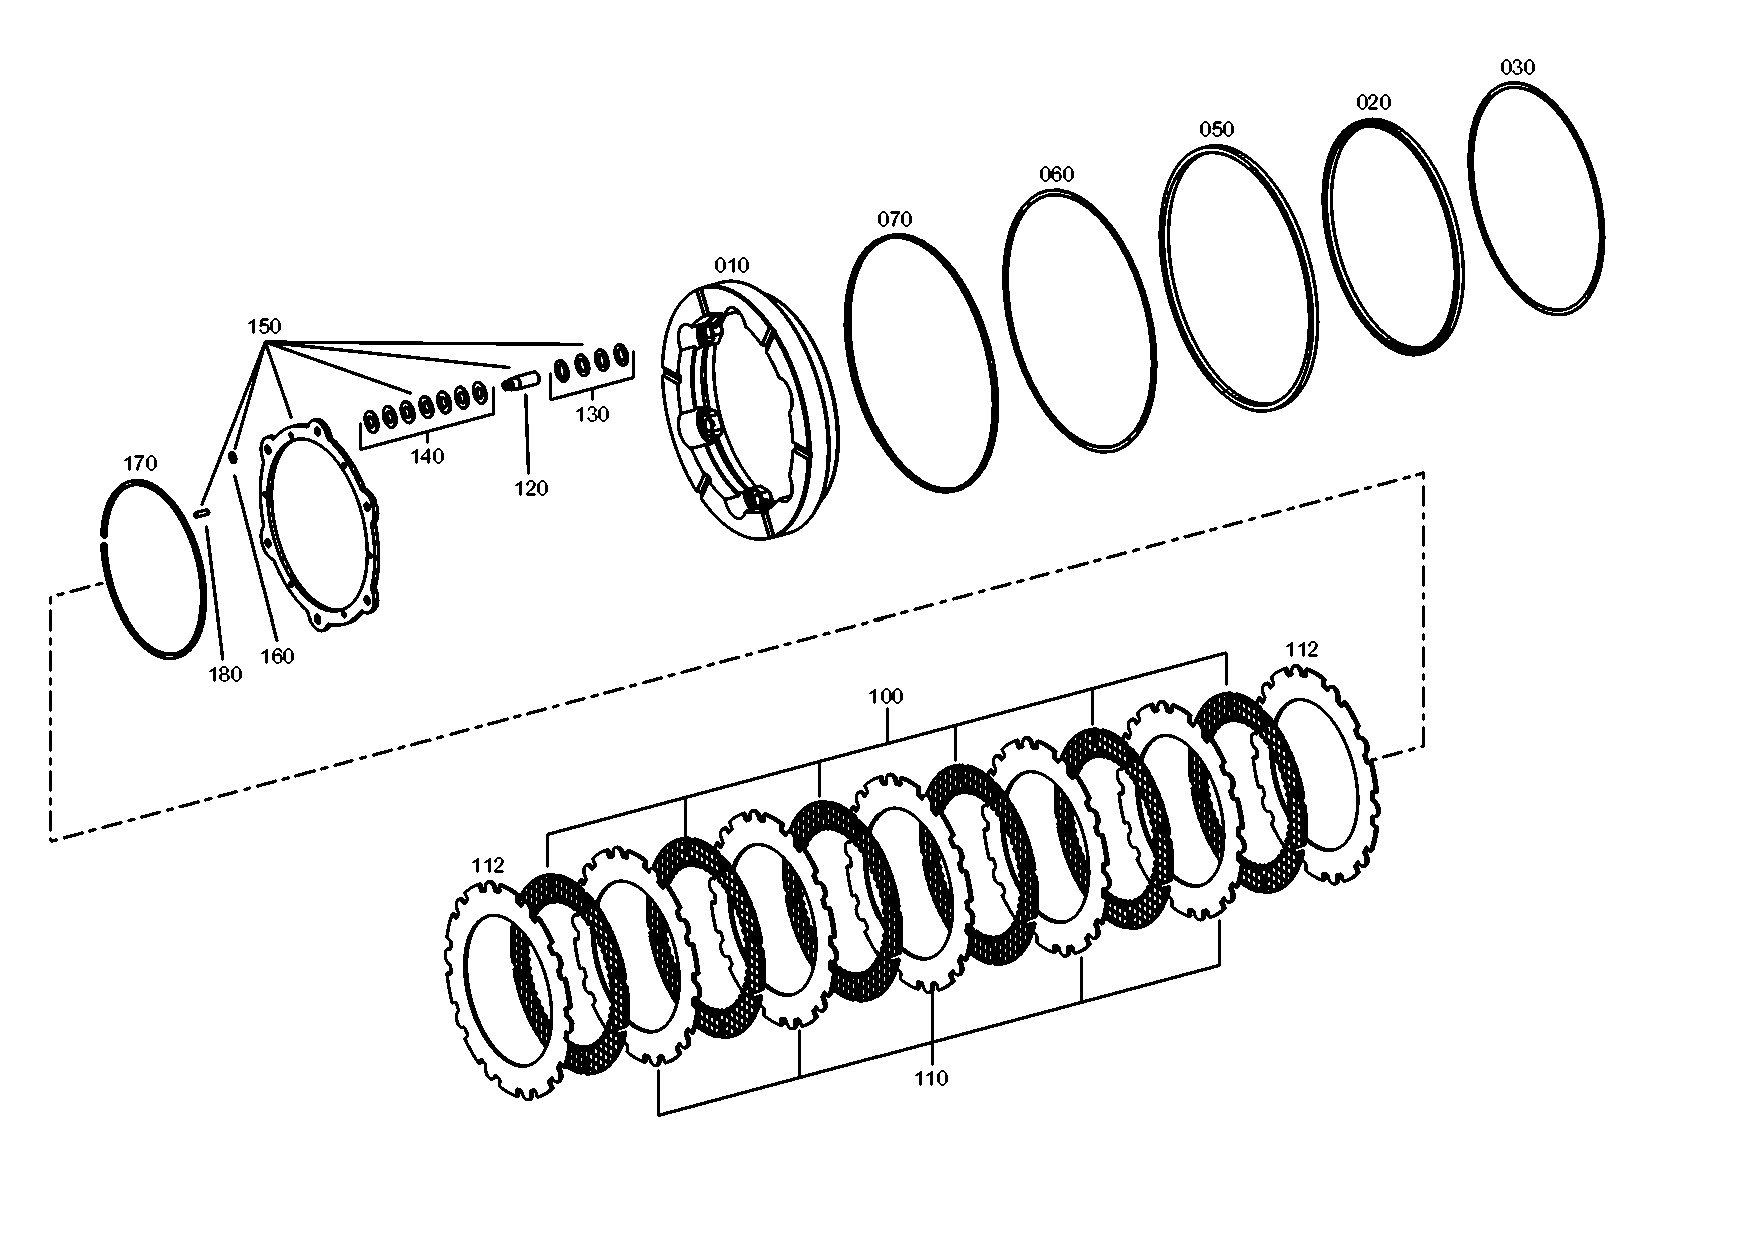 drawing for LIEBHERR GMBH 7624158 - SLOTTED RING (figure 3)